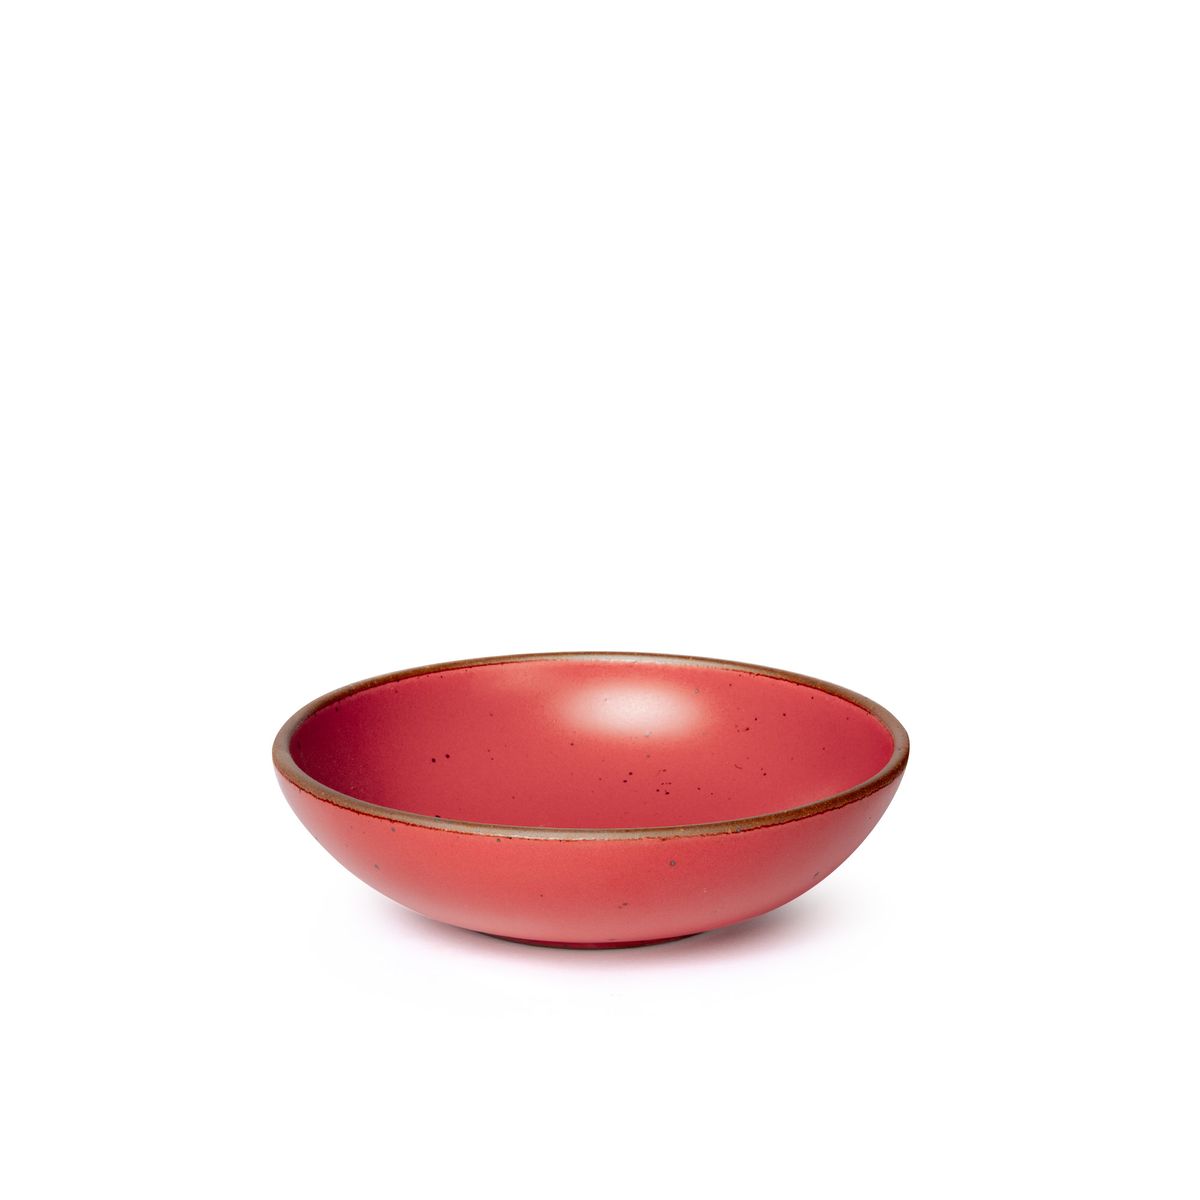 A dinner-sized shallow ceramic bowl in a bold red color featuring iron speckles and an unglazed rim